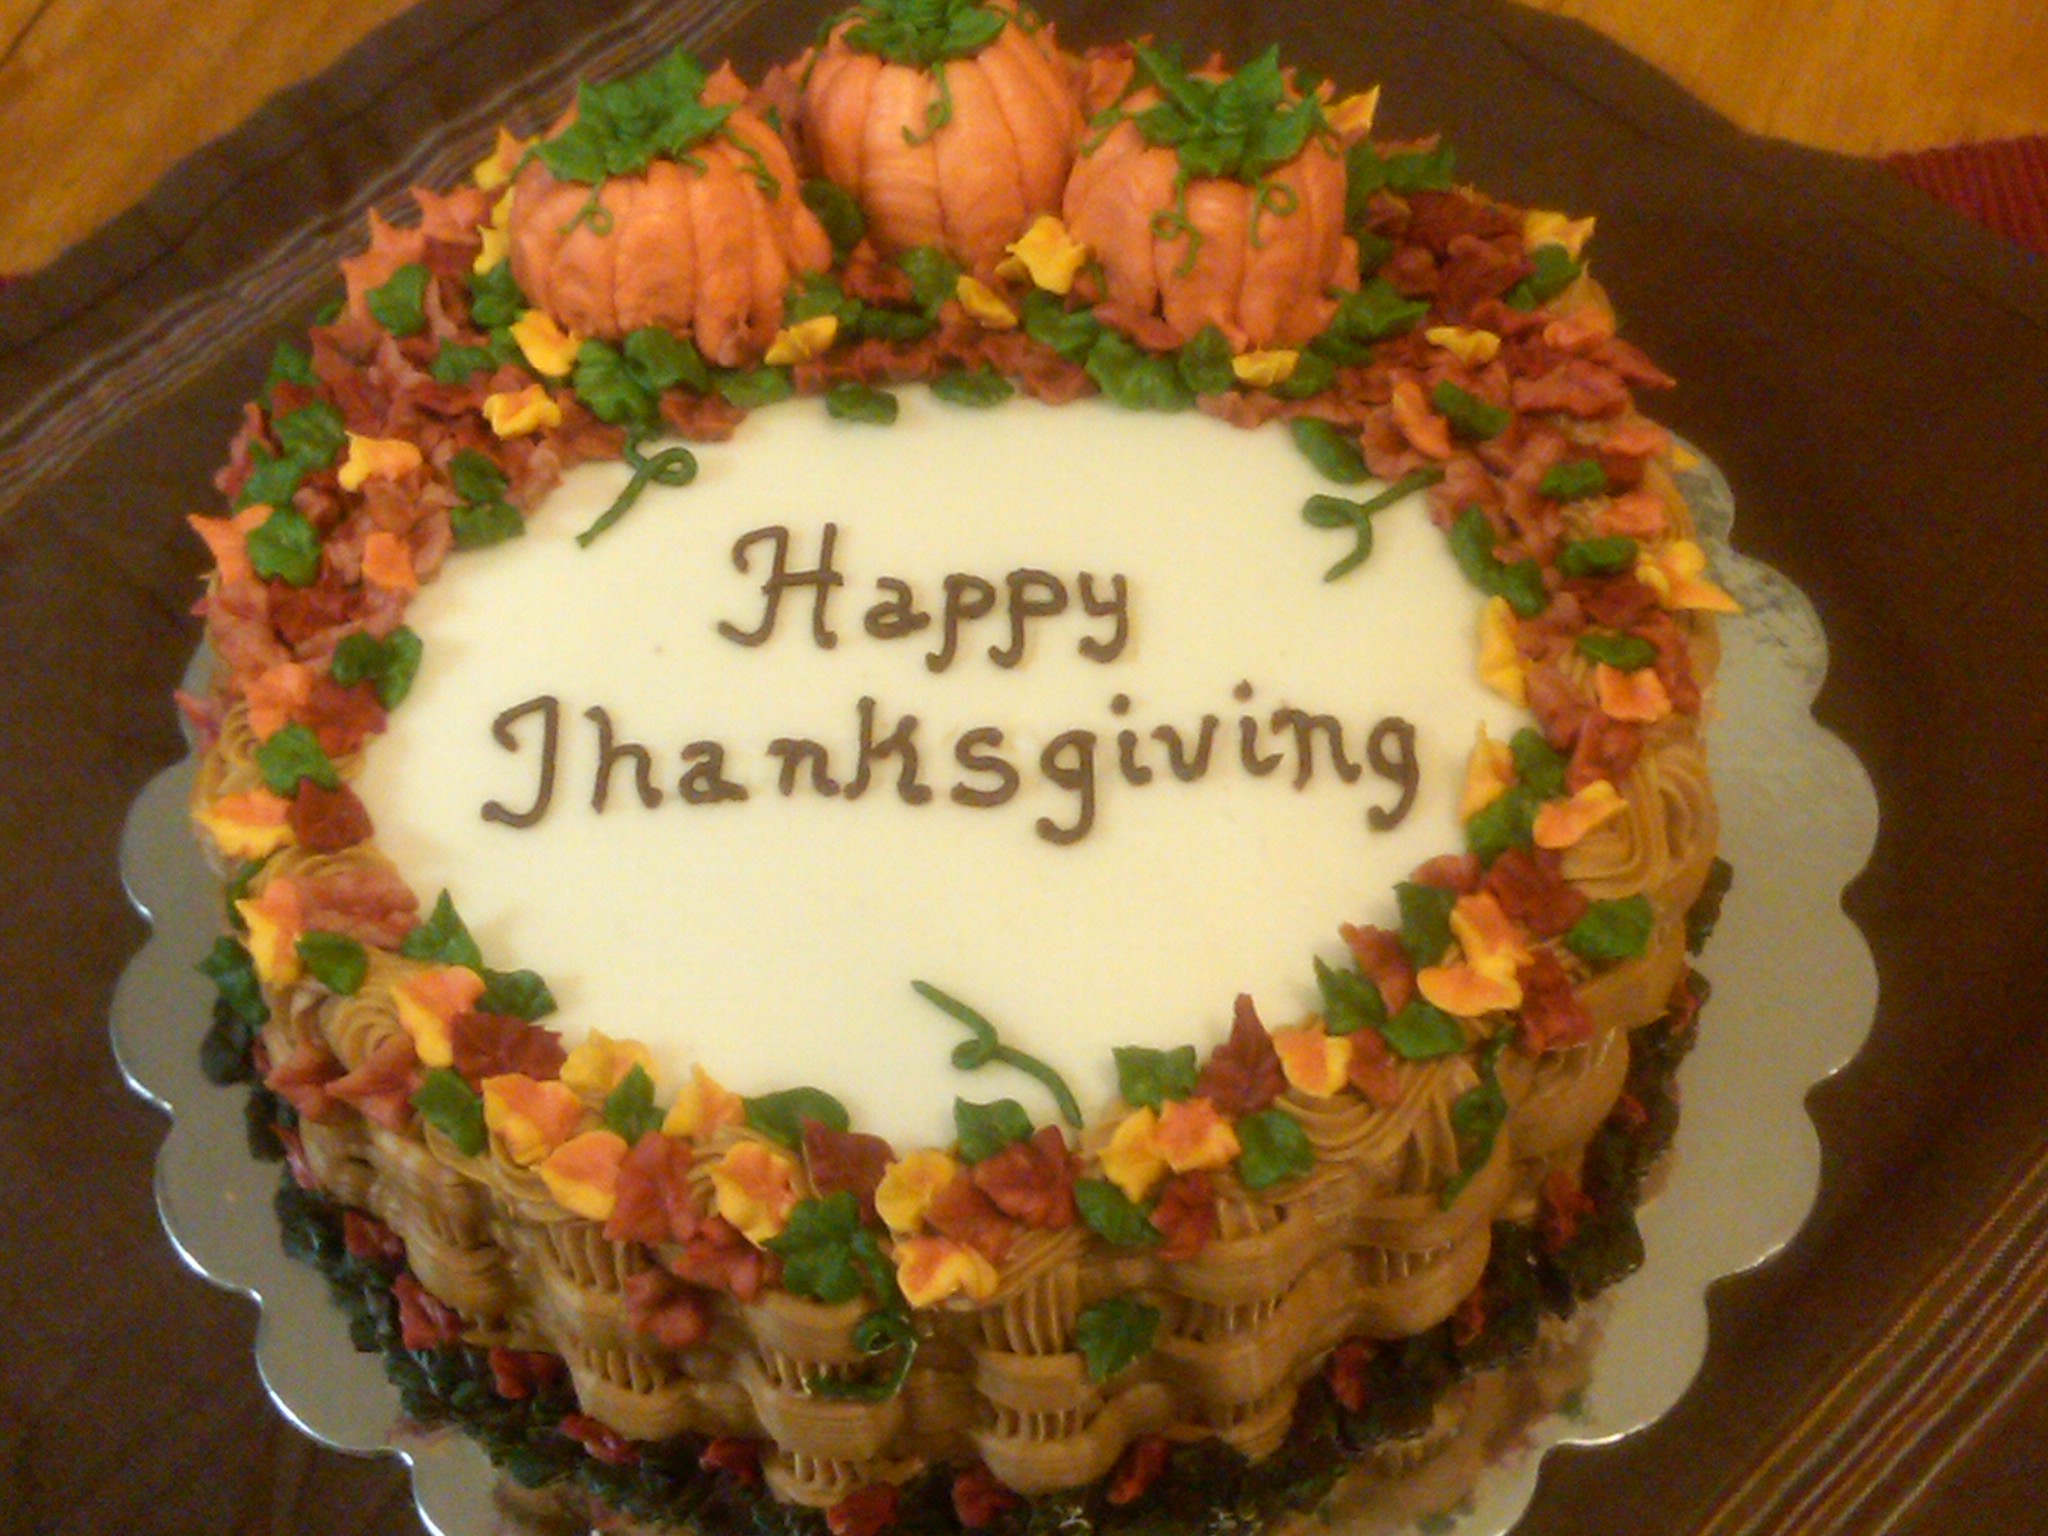 Easy Thanksgiving Cake Decorating - Cute And Simple Thanksgiving Cake Idea Thanksgiving Cakes Turkey Cake Thanksgiving Desserts / Special thanks to our vendor partners for this project: